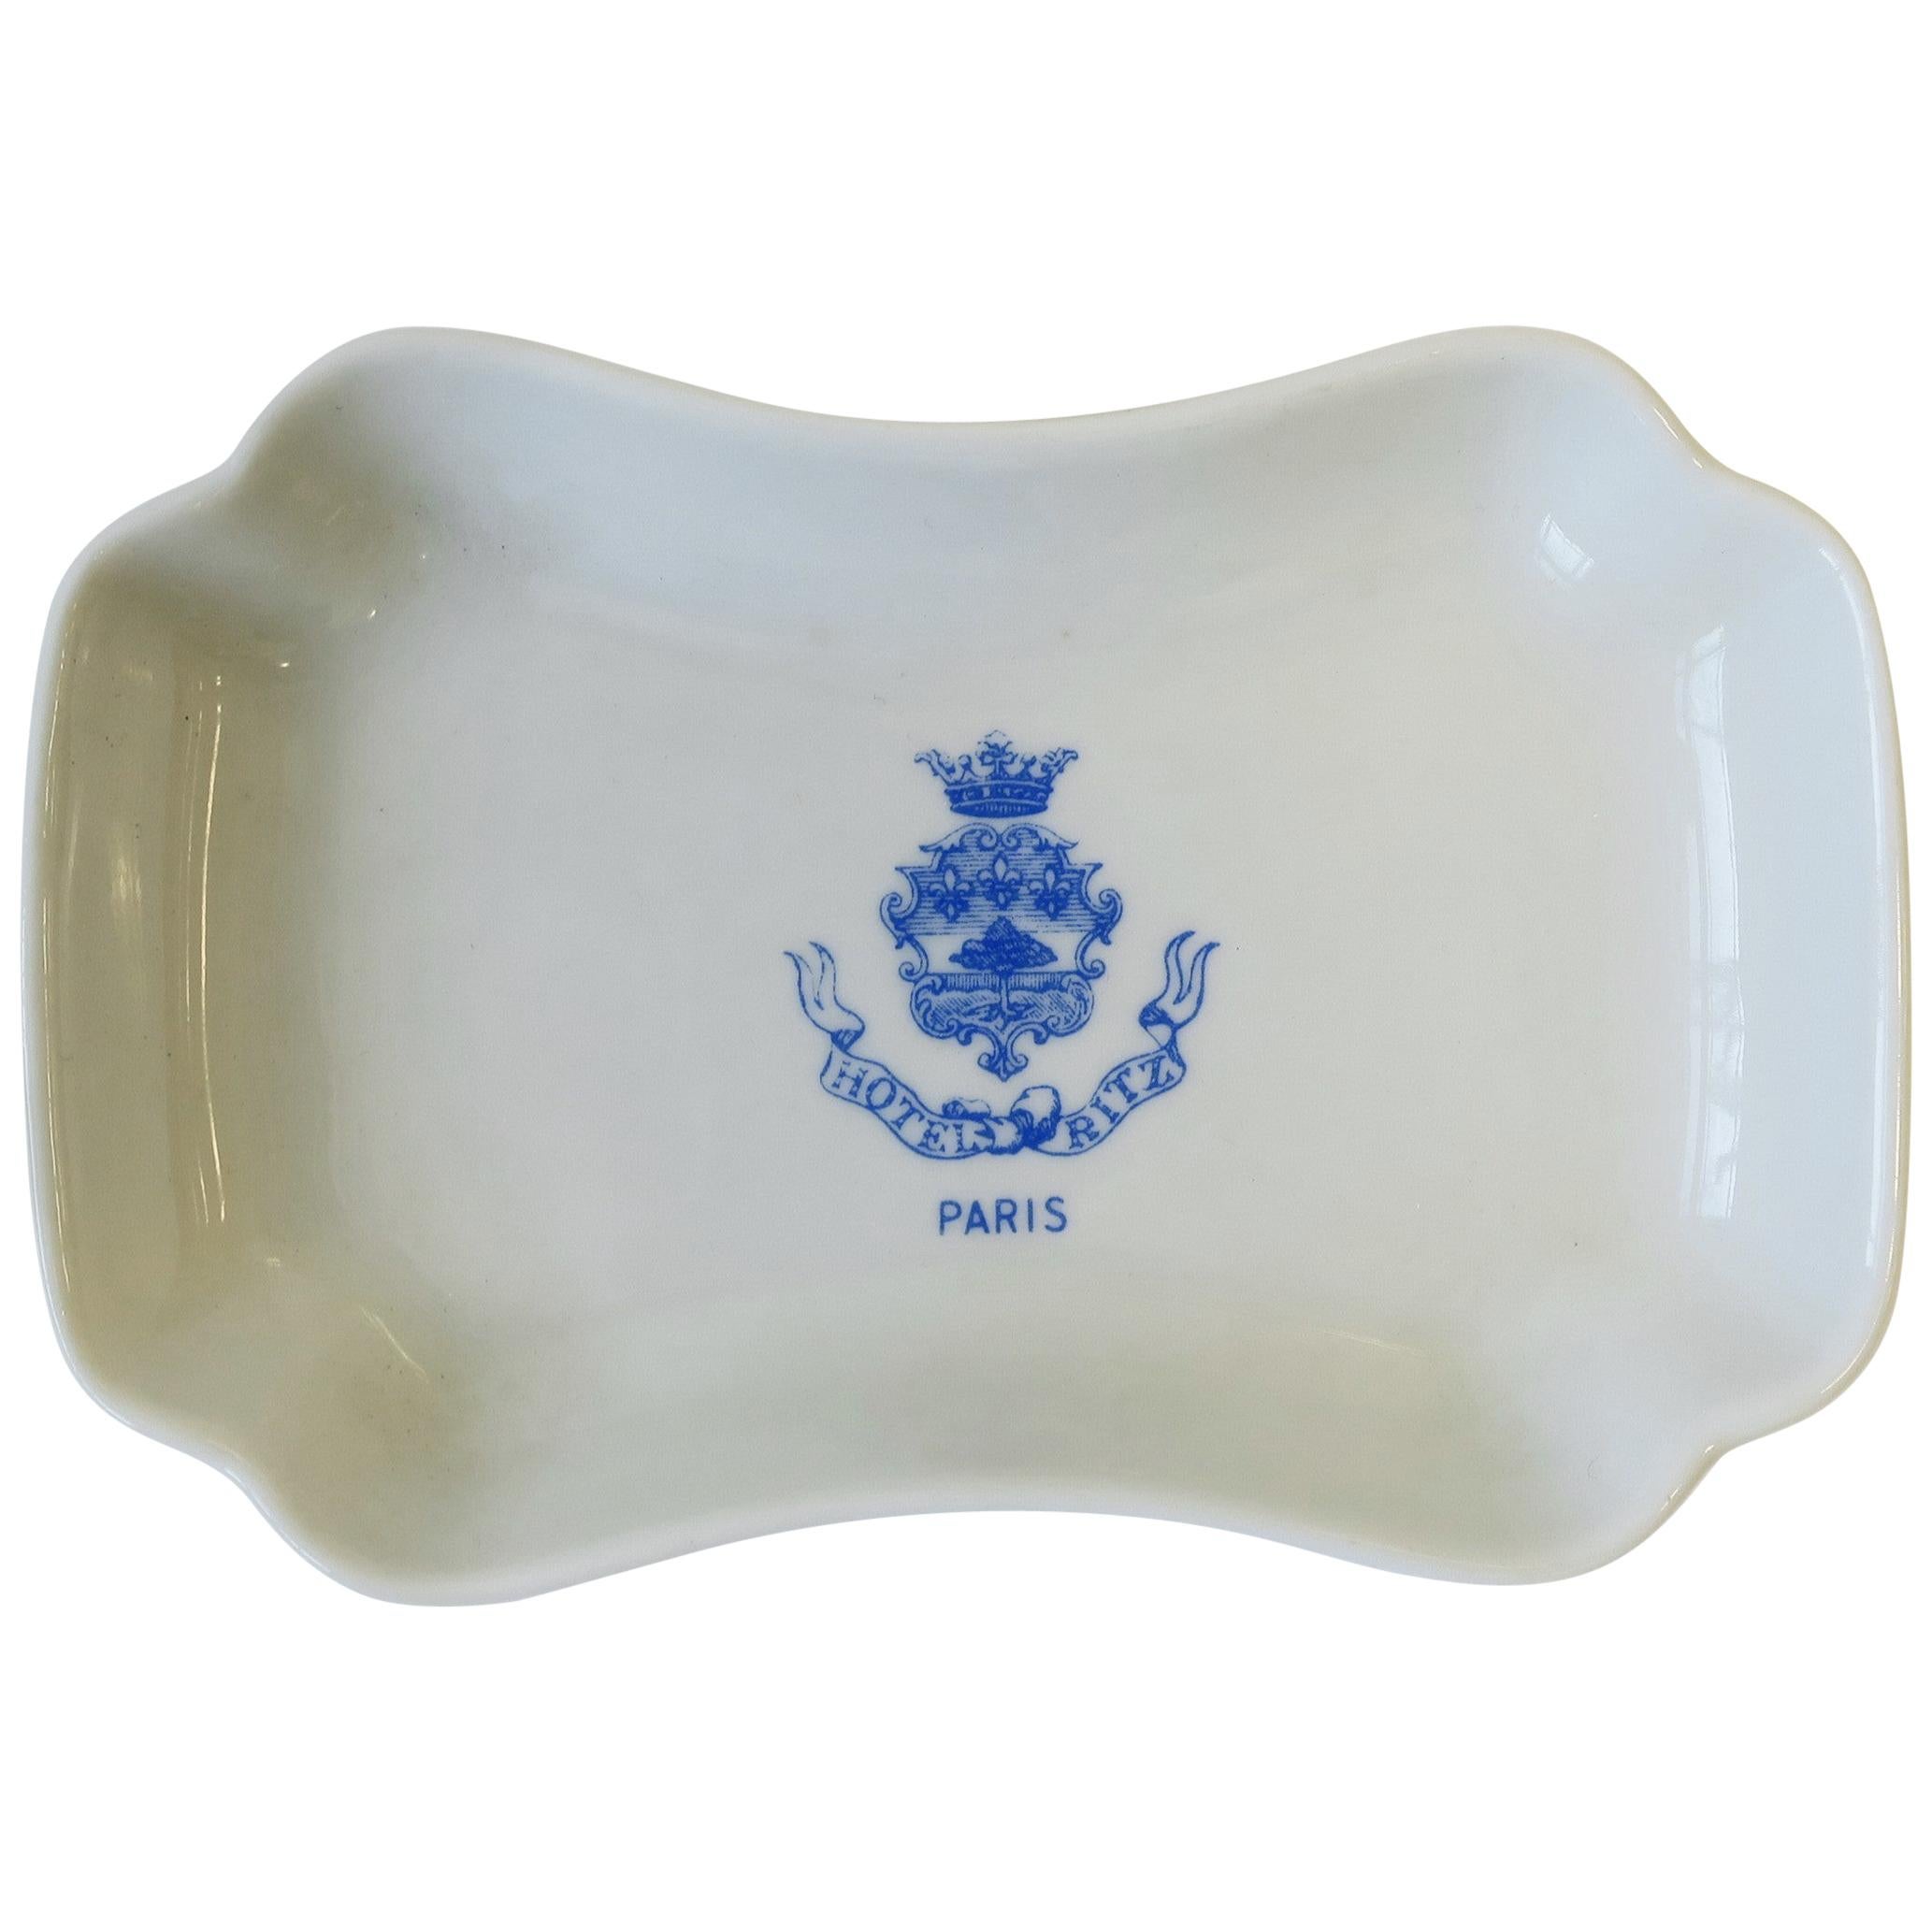 Hotel Ritz Paris Blue and White Porcelain Jewelry Dish, France